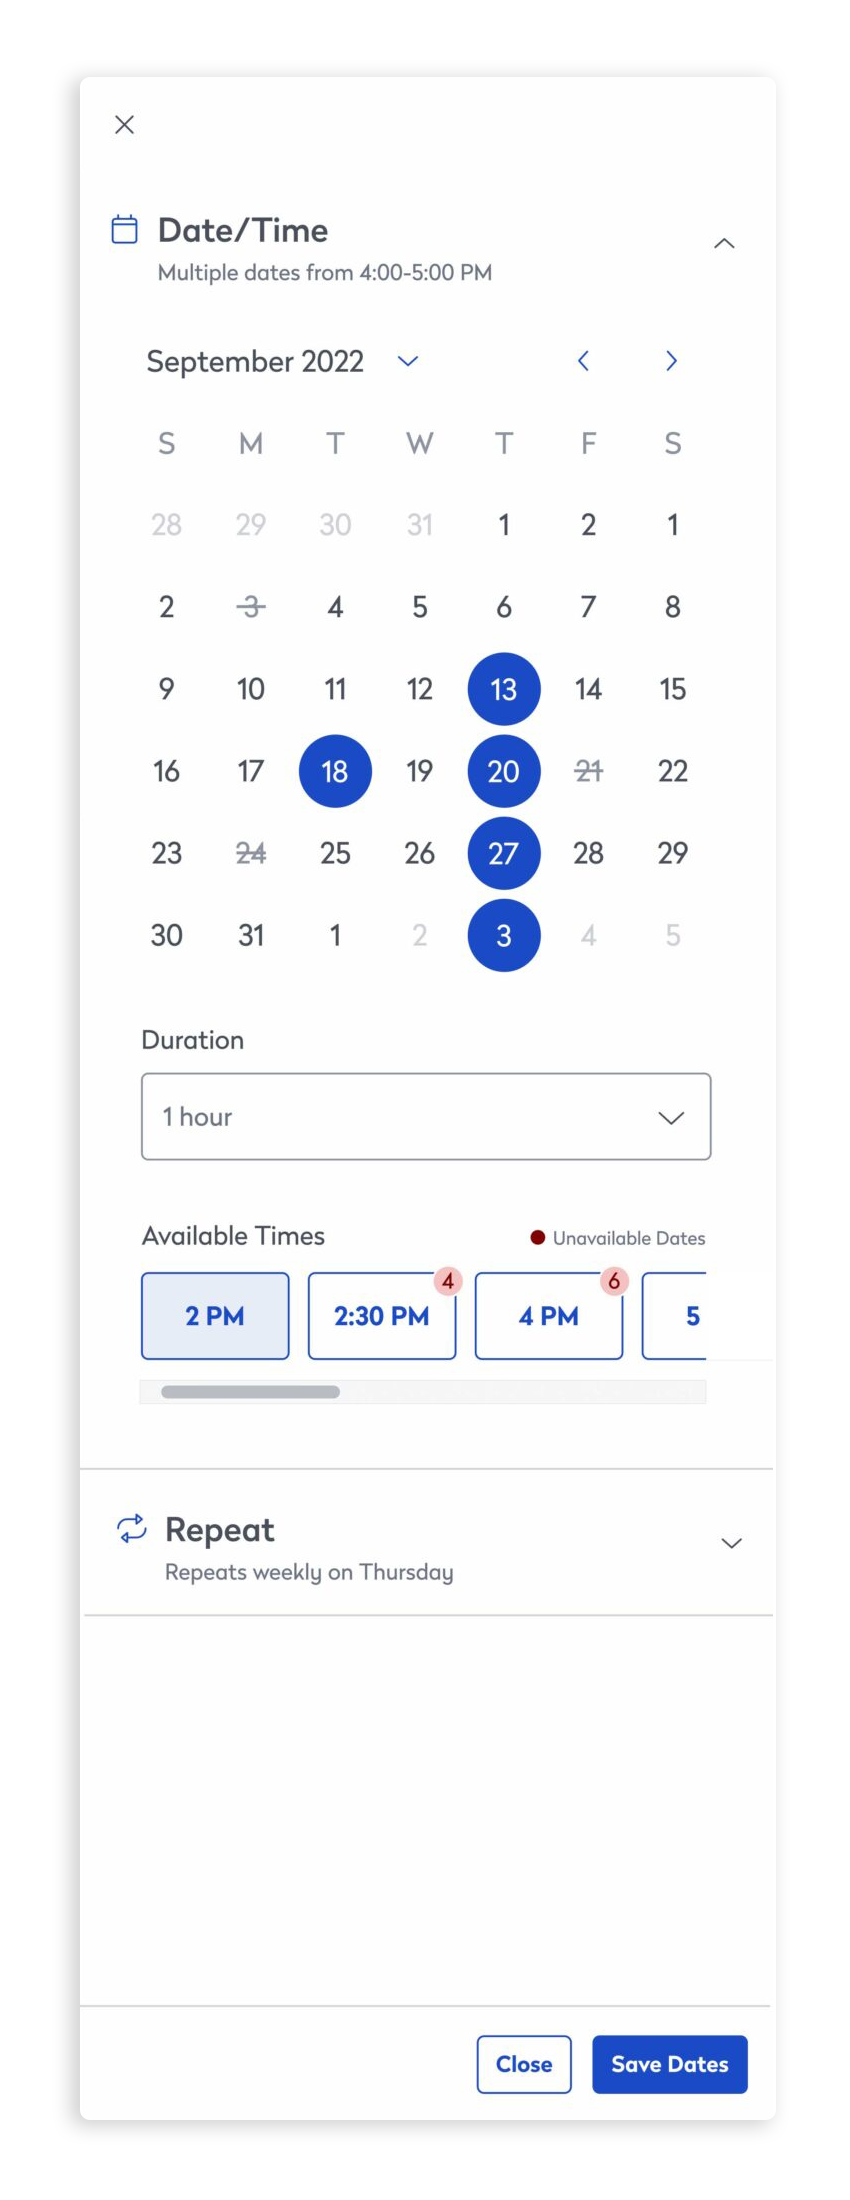 Bookings are highly customizable allowing users to not only set up a recurrence, but add single dates that fall outside that recurrence.